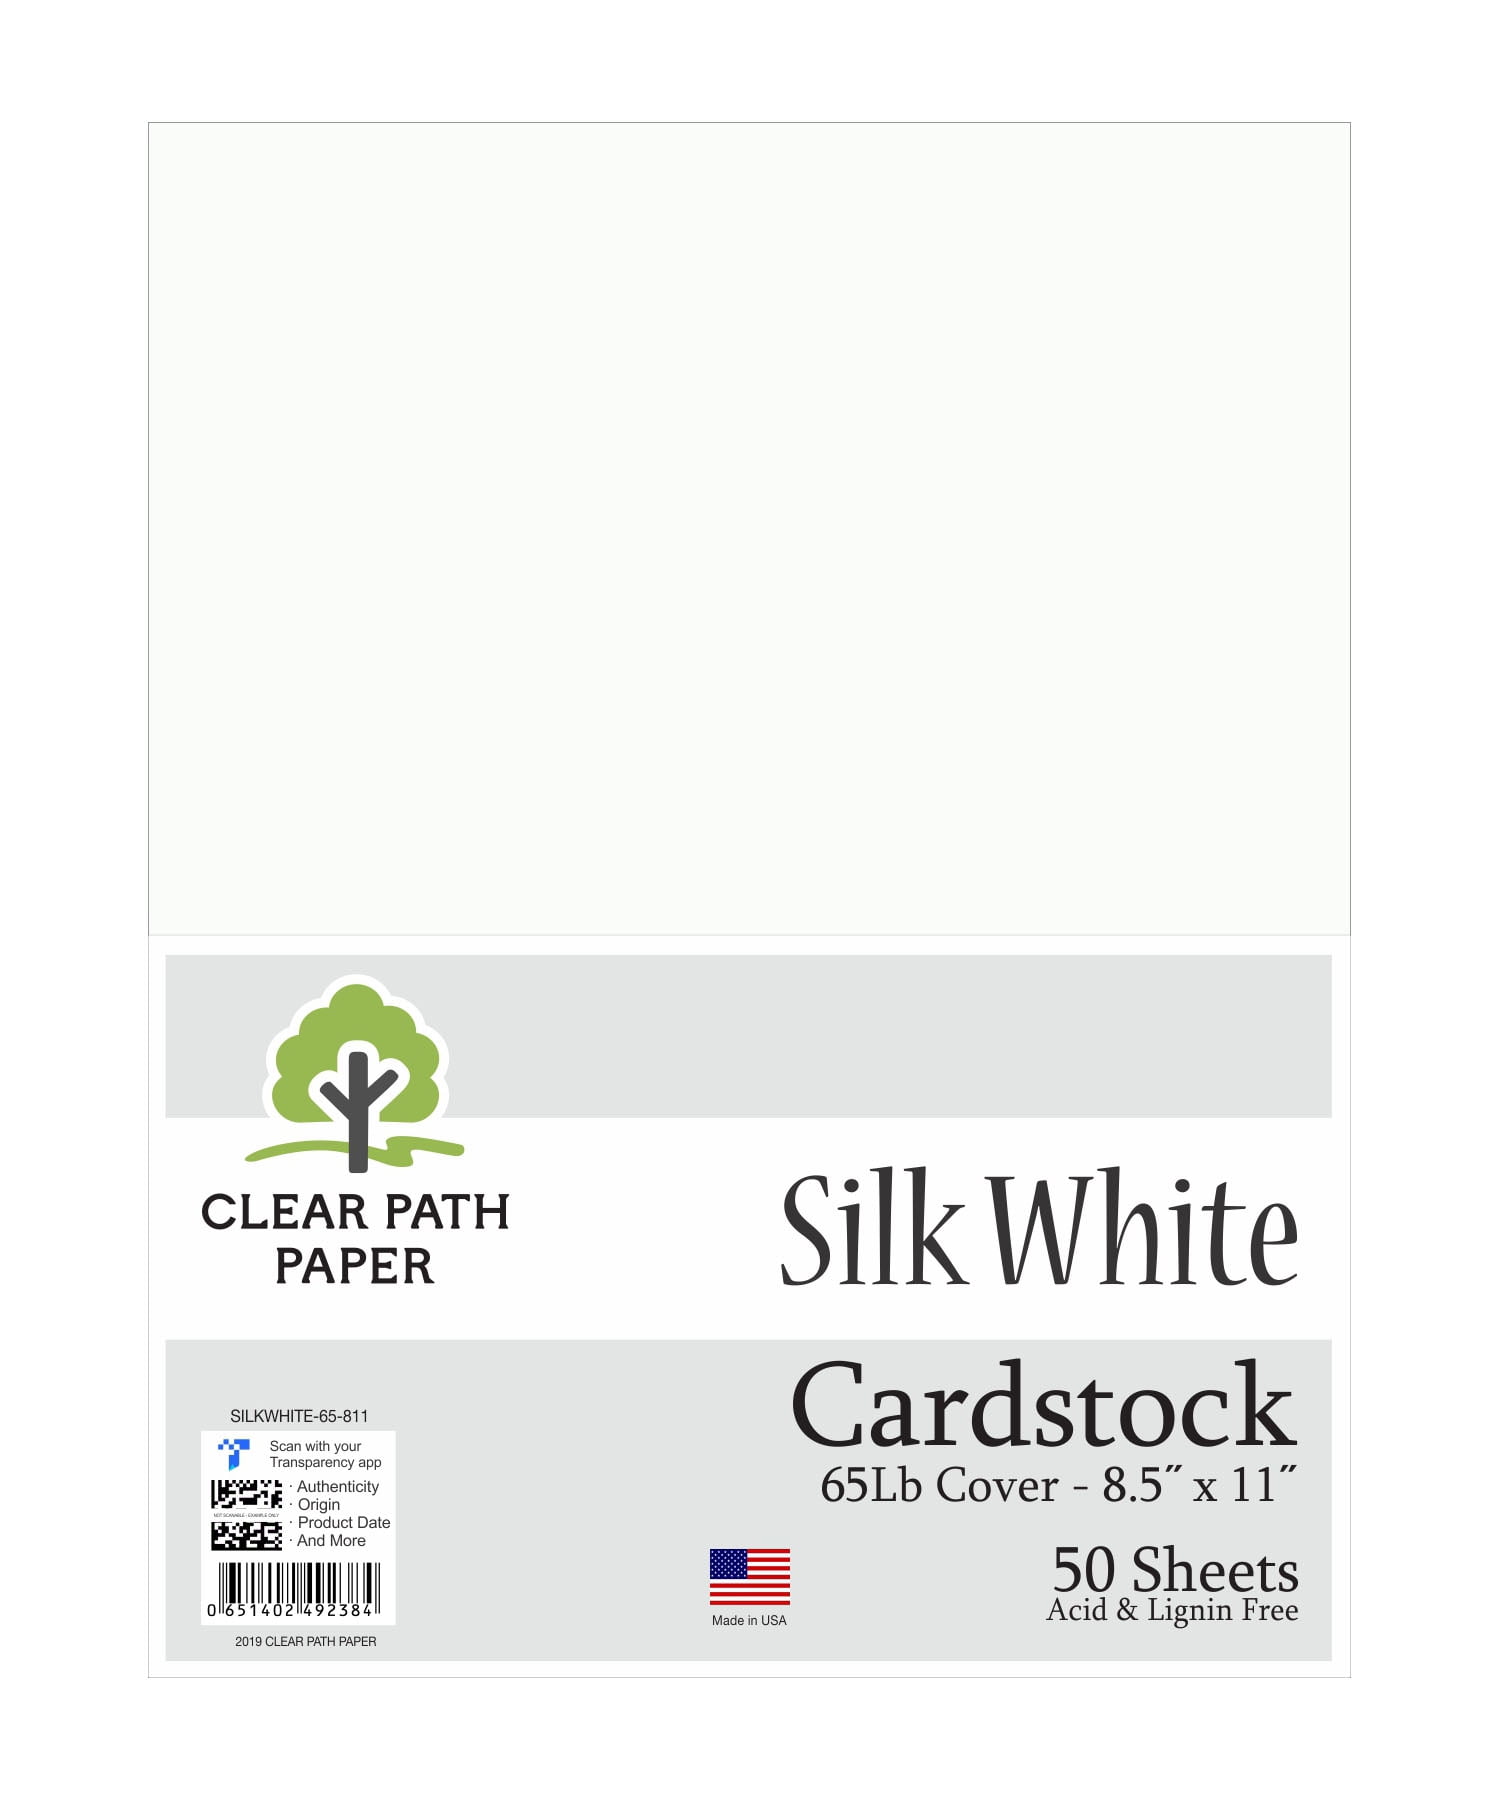 Red Cardstock - 8.5 x 11 inch - 65Lb Cover - 50 Sheets - Clear Path Paper